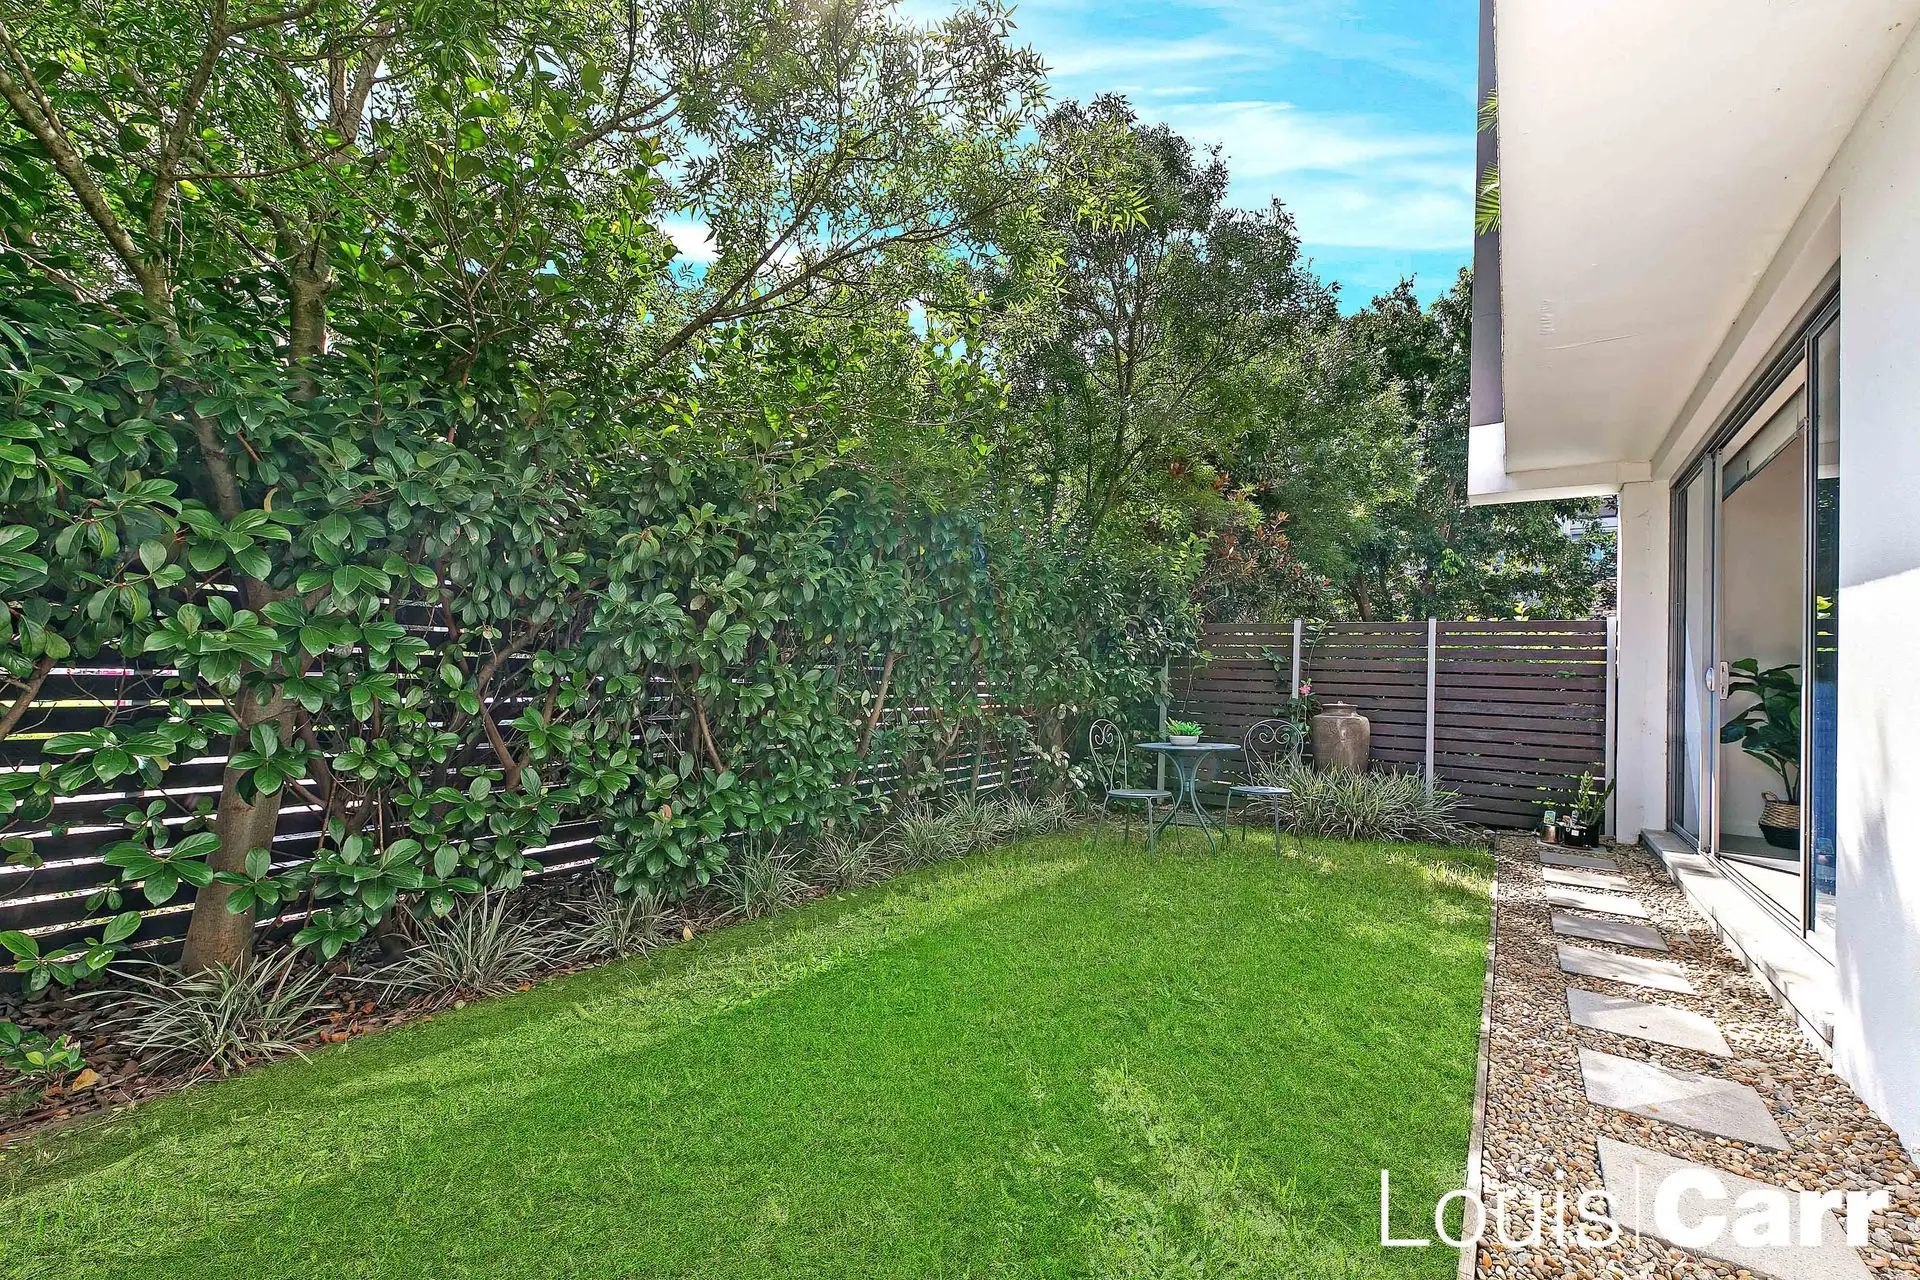 Photo #10: 101/48 Peninsula Way, Norwest - Sold by Louis Carr Real Estate